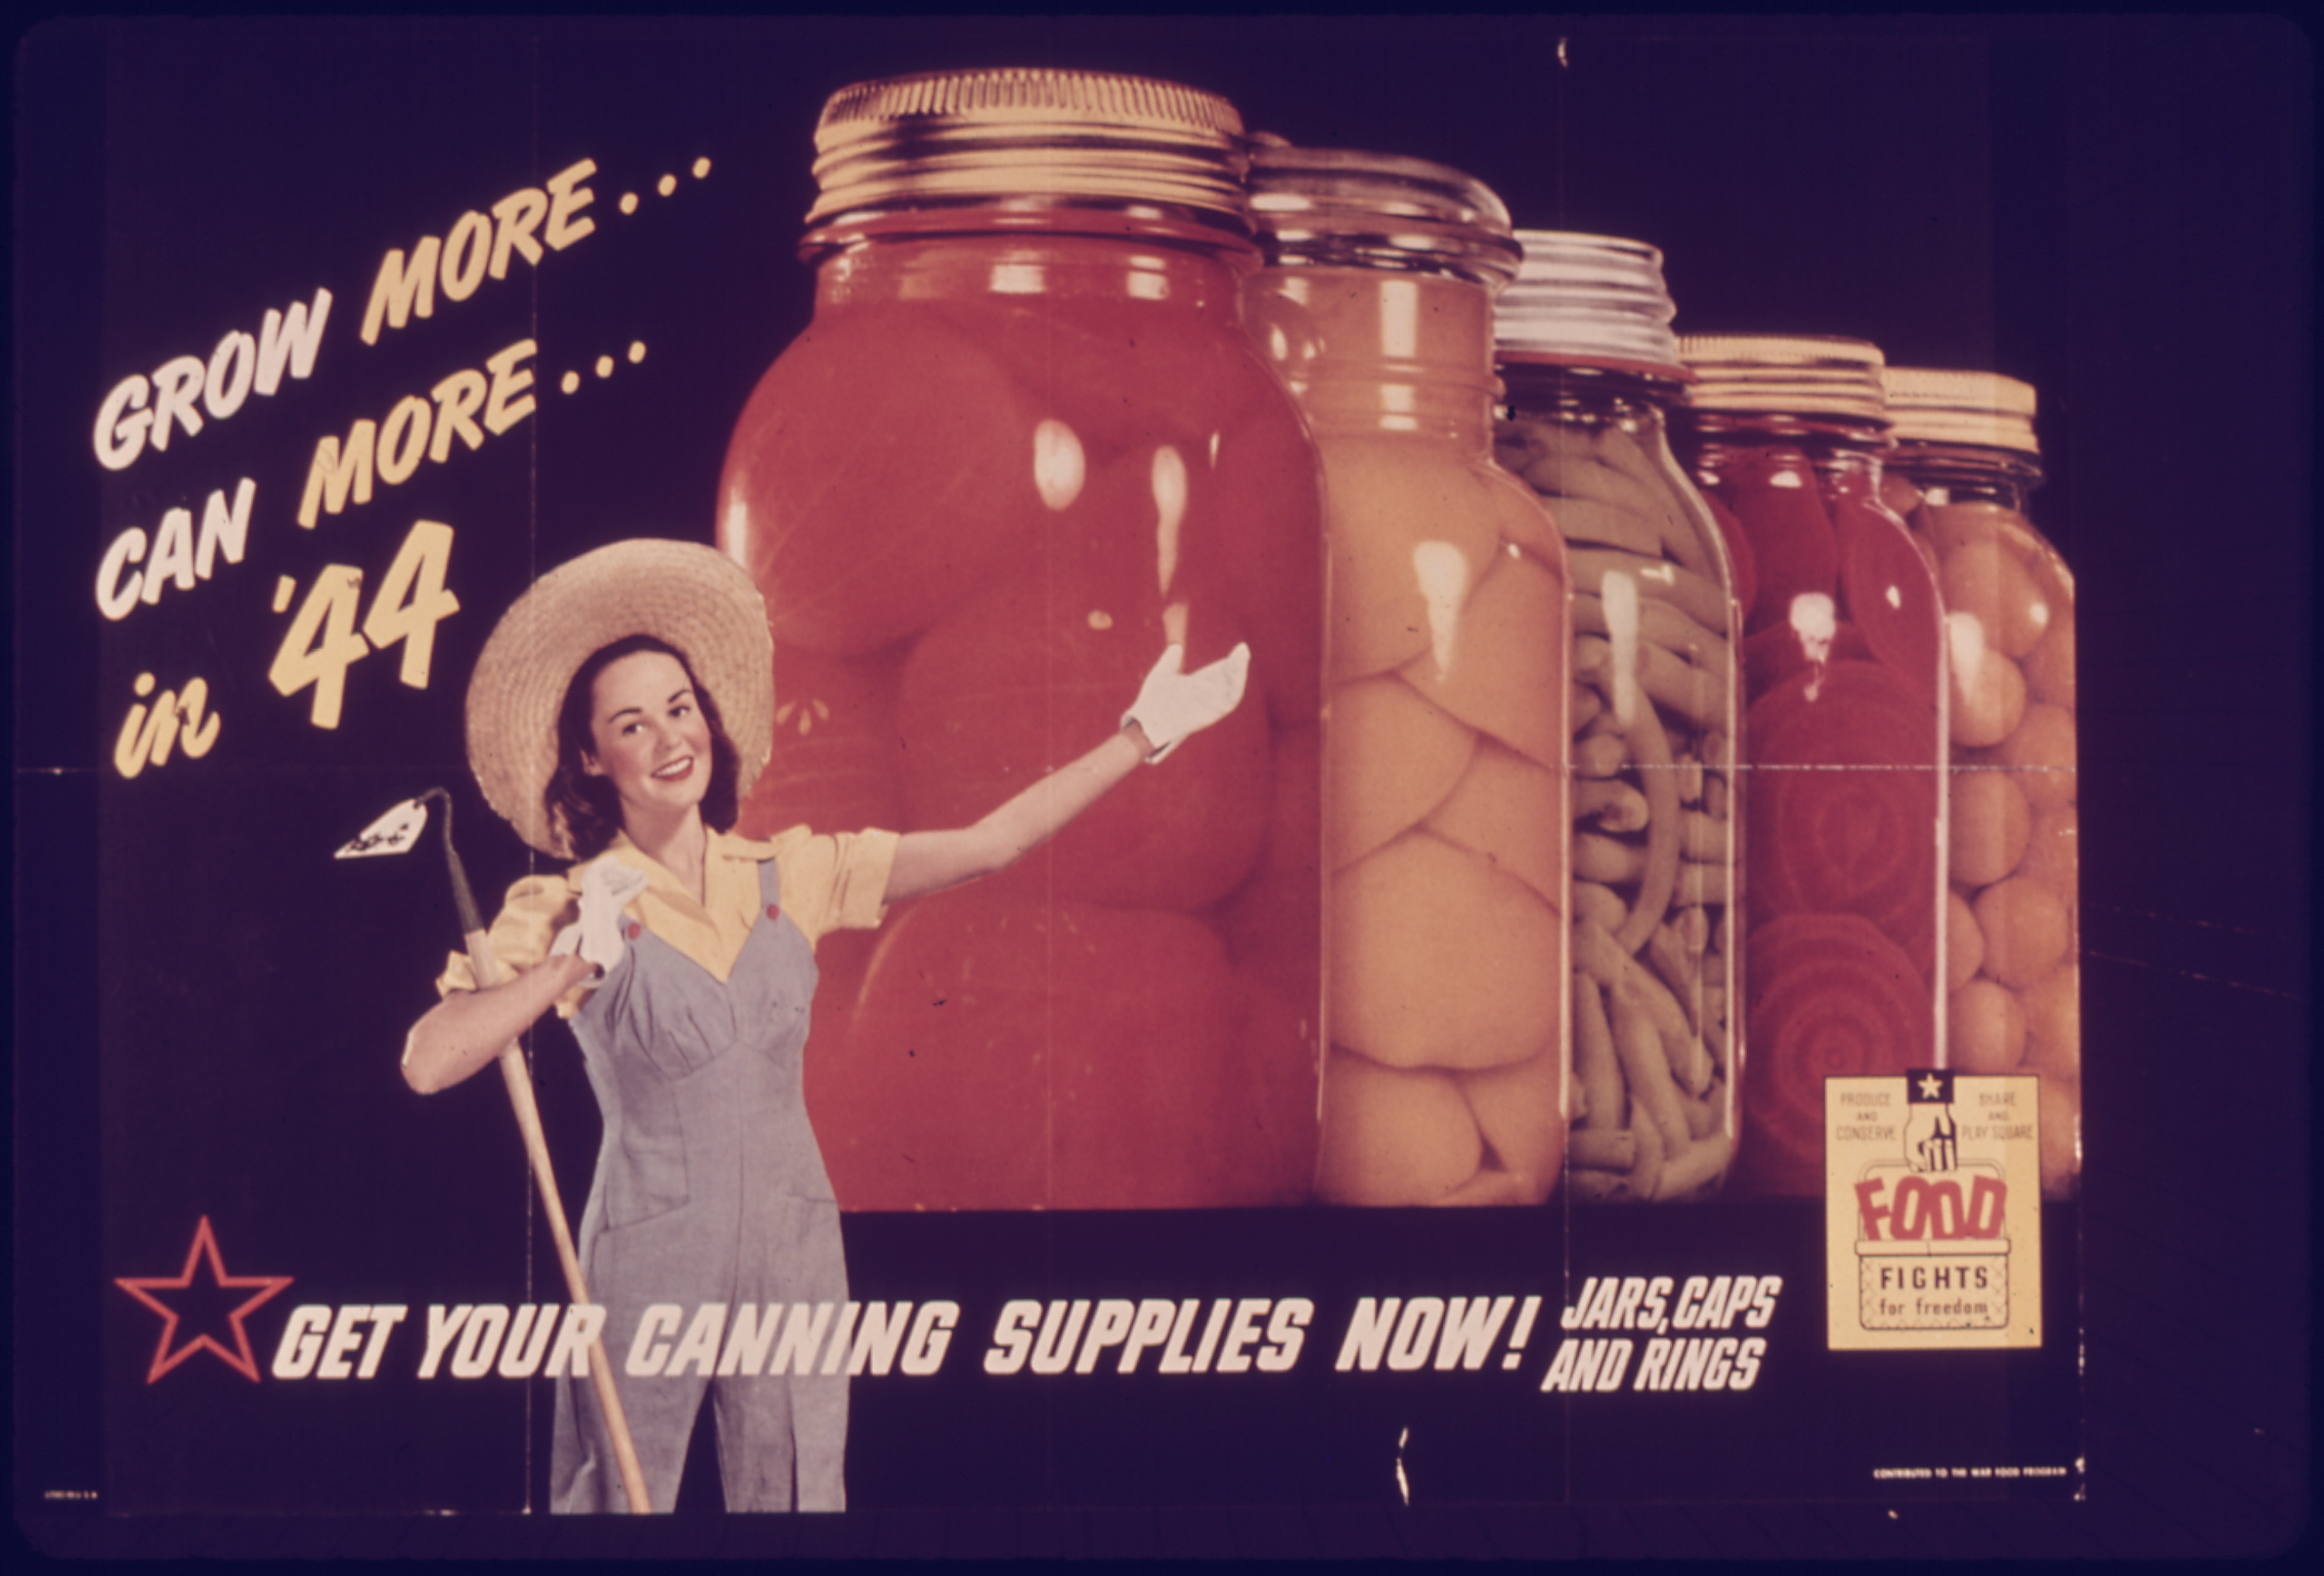 A WWII poster with a black background and a model girl farmer in feminine overalls and a wide-brim straw hat with hoe in hand gestures at a row of five different canned vegetables in jars